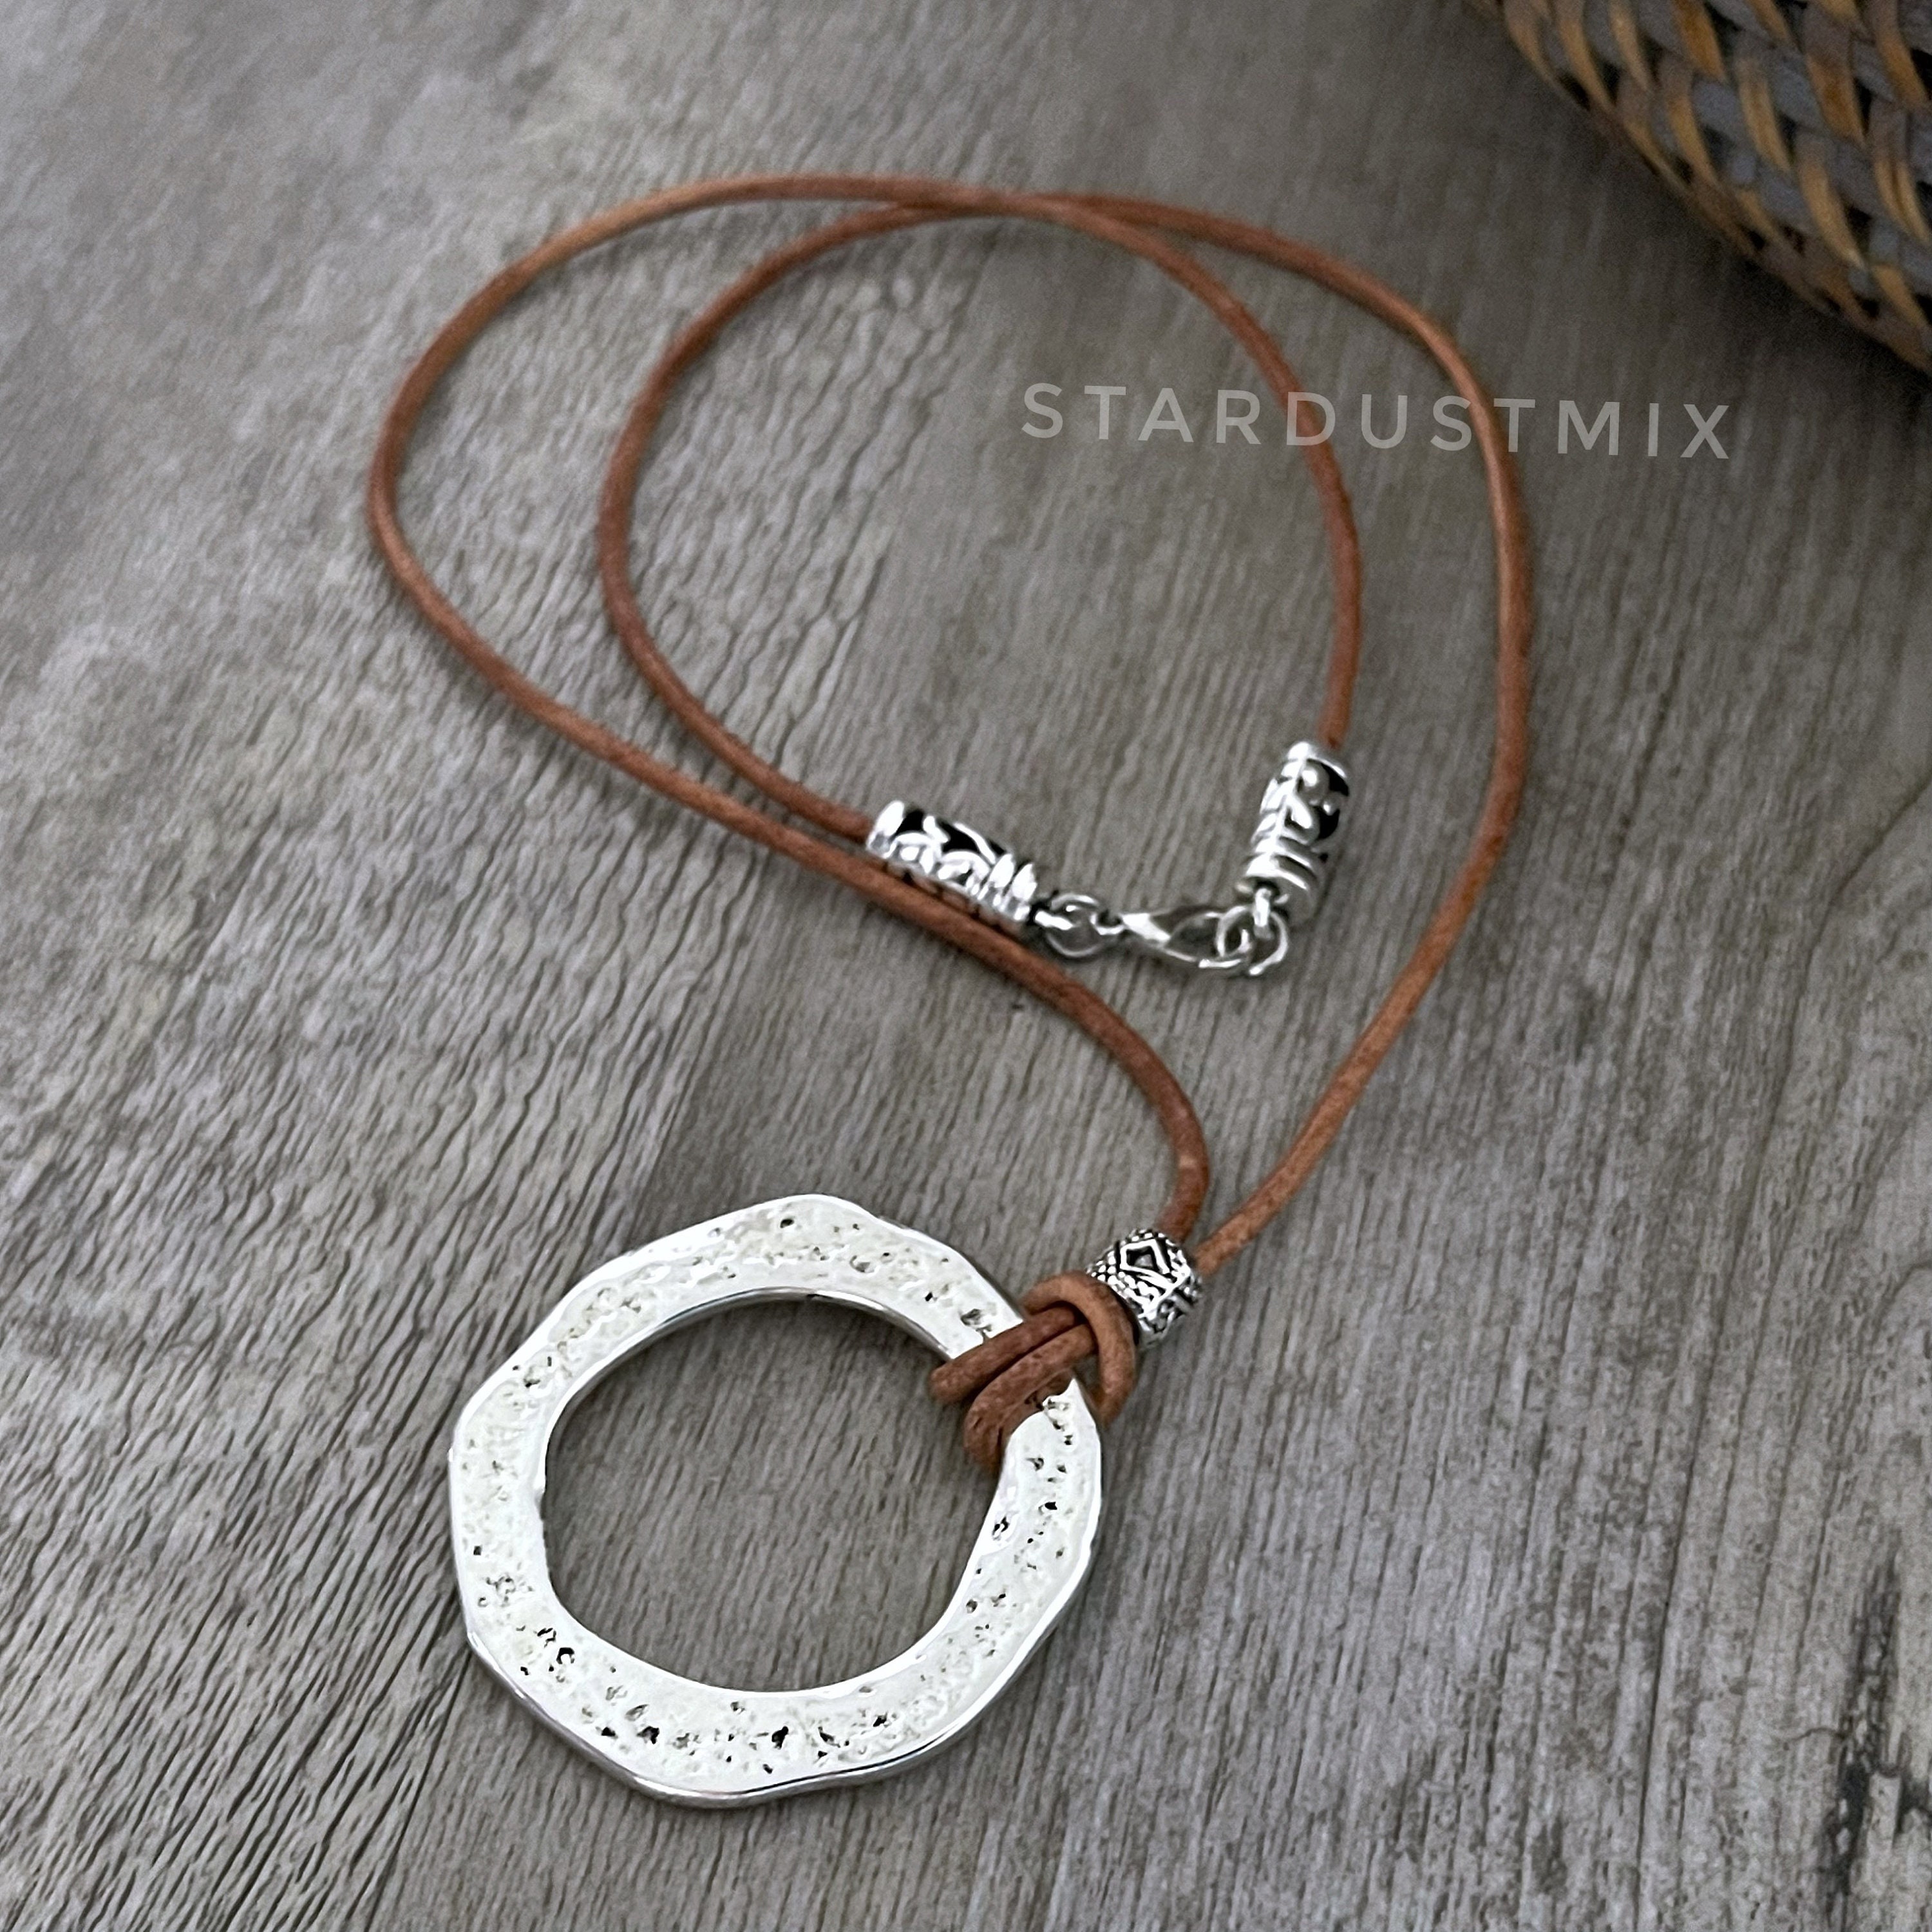 Necklace for Pendant Charm, Thin Leather Cord Necklace for Pendant, Leather String Necklace with Metal Clasp Locking Closure Custom Length